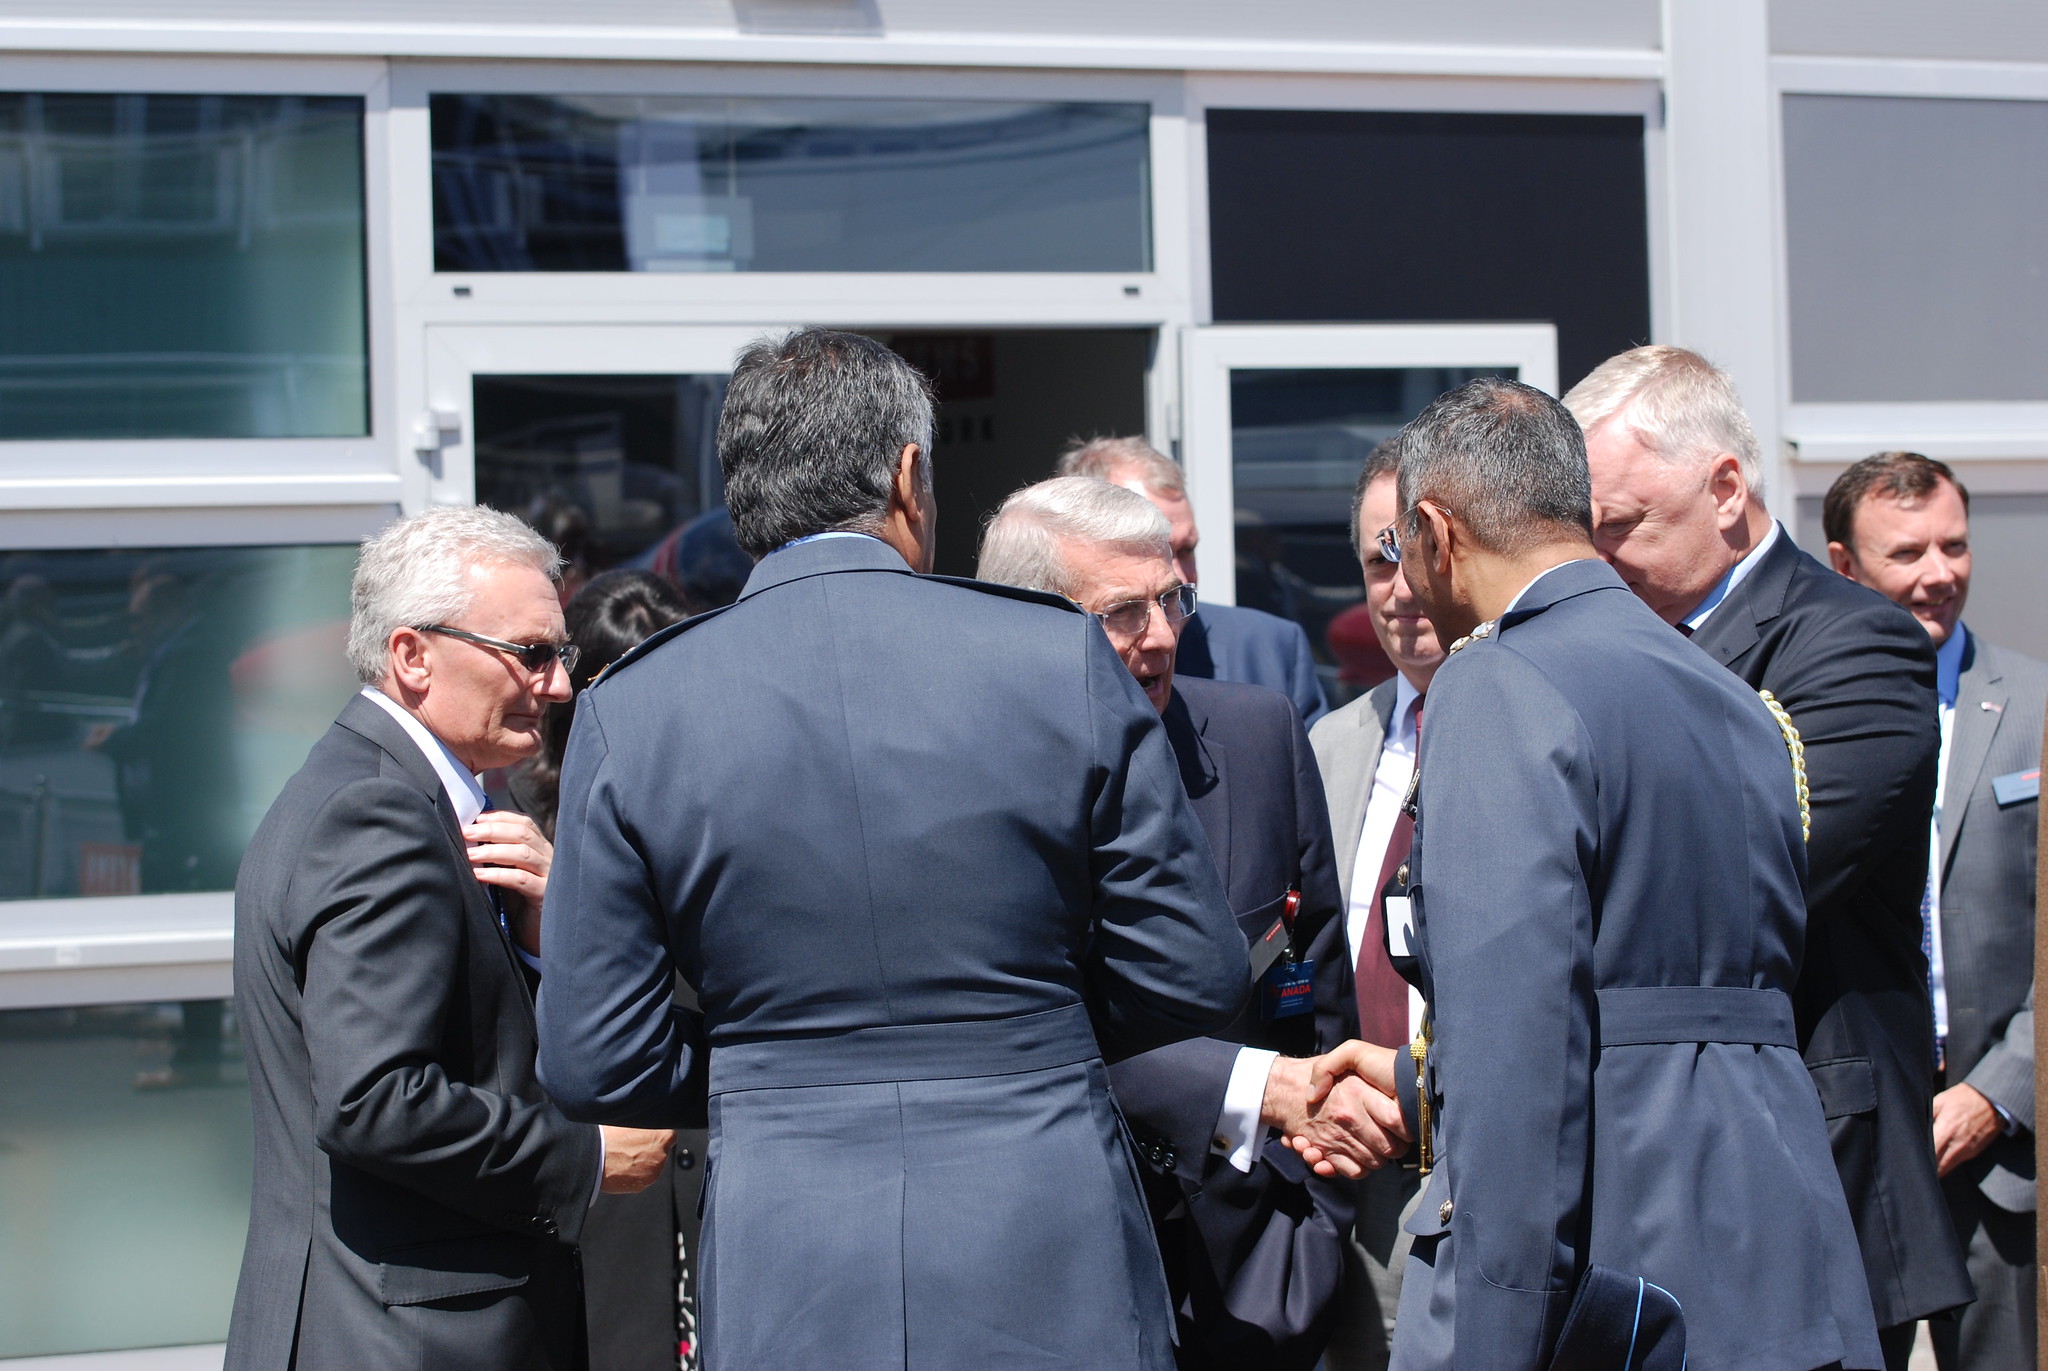 Seven men in suits talking, all with short greying hair